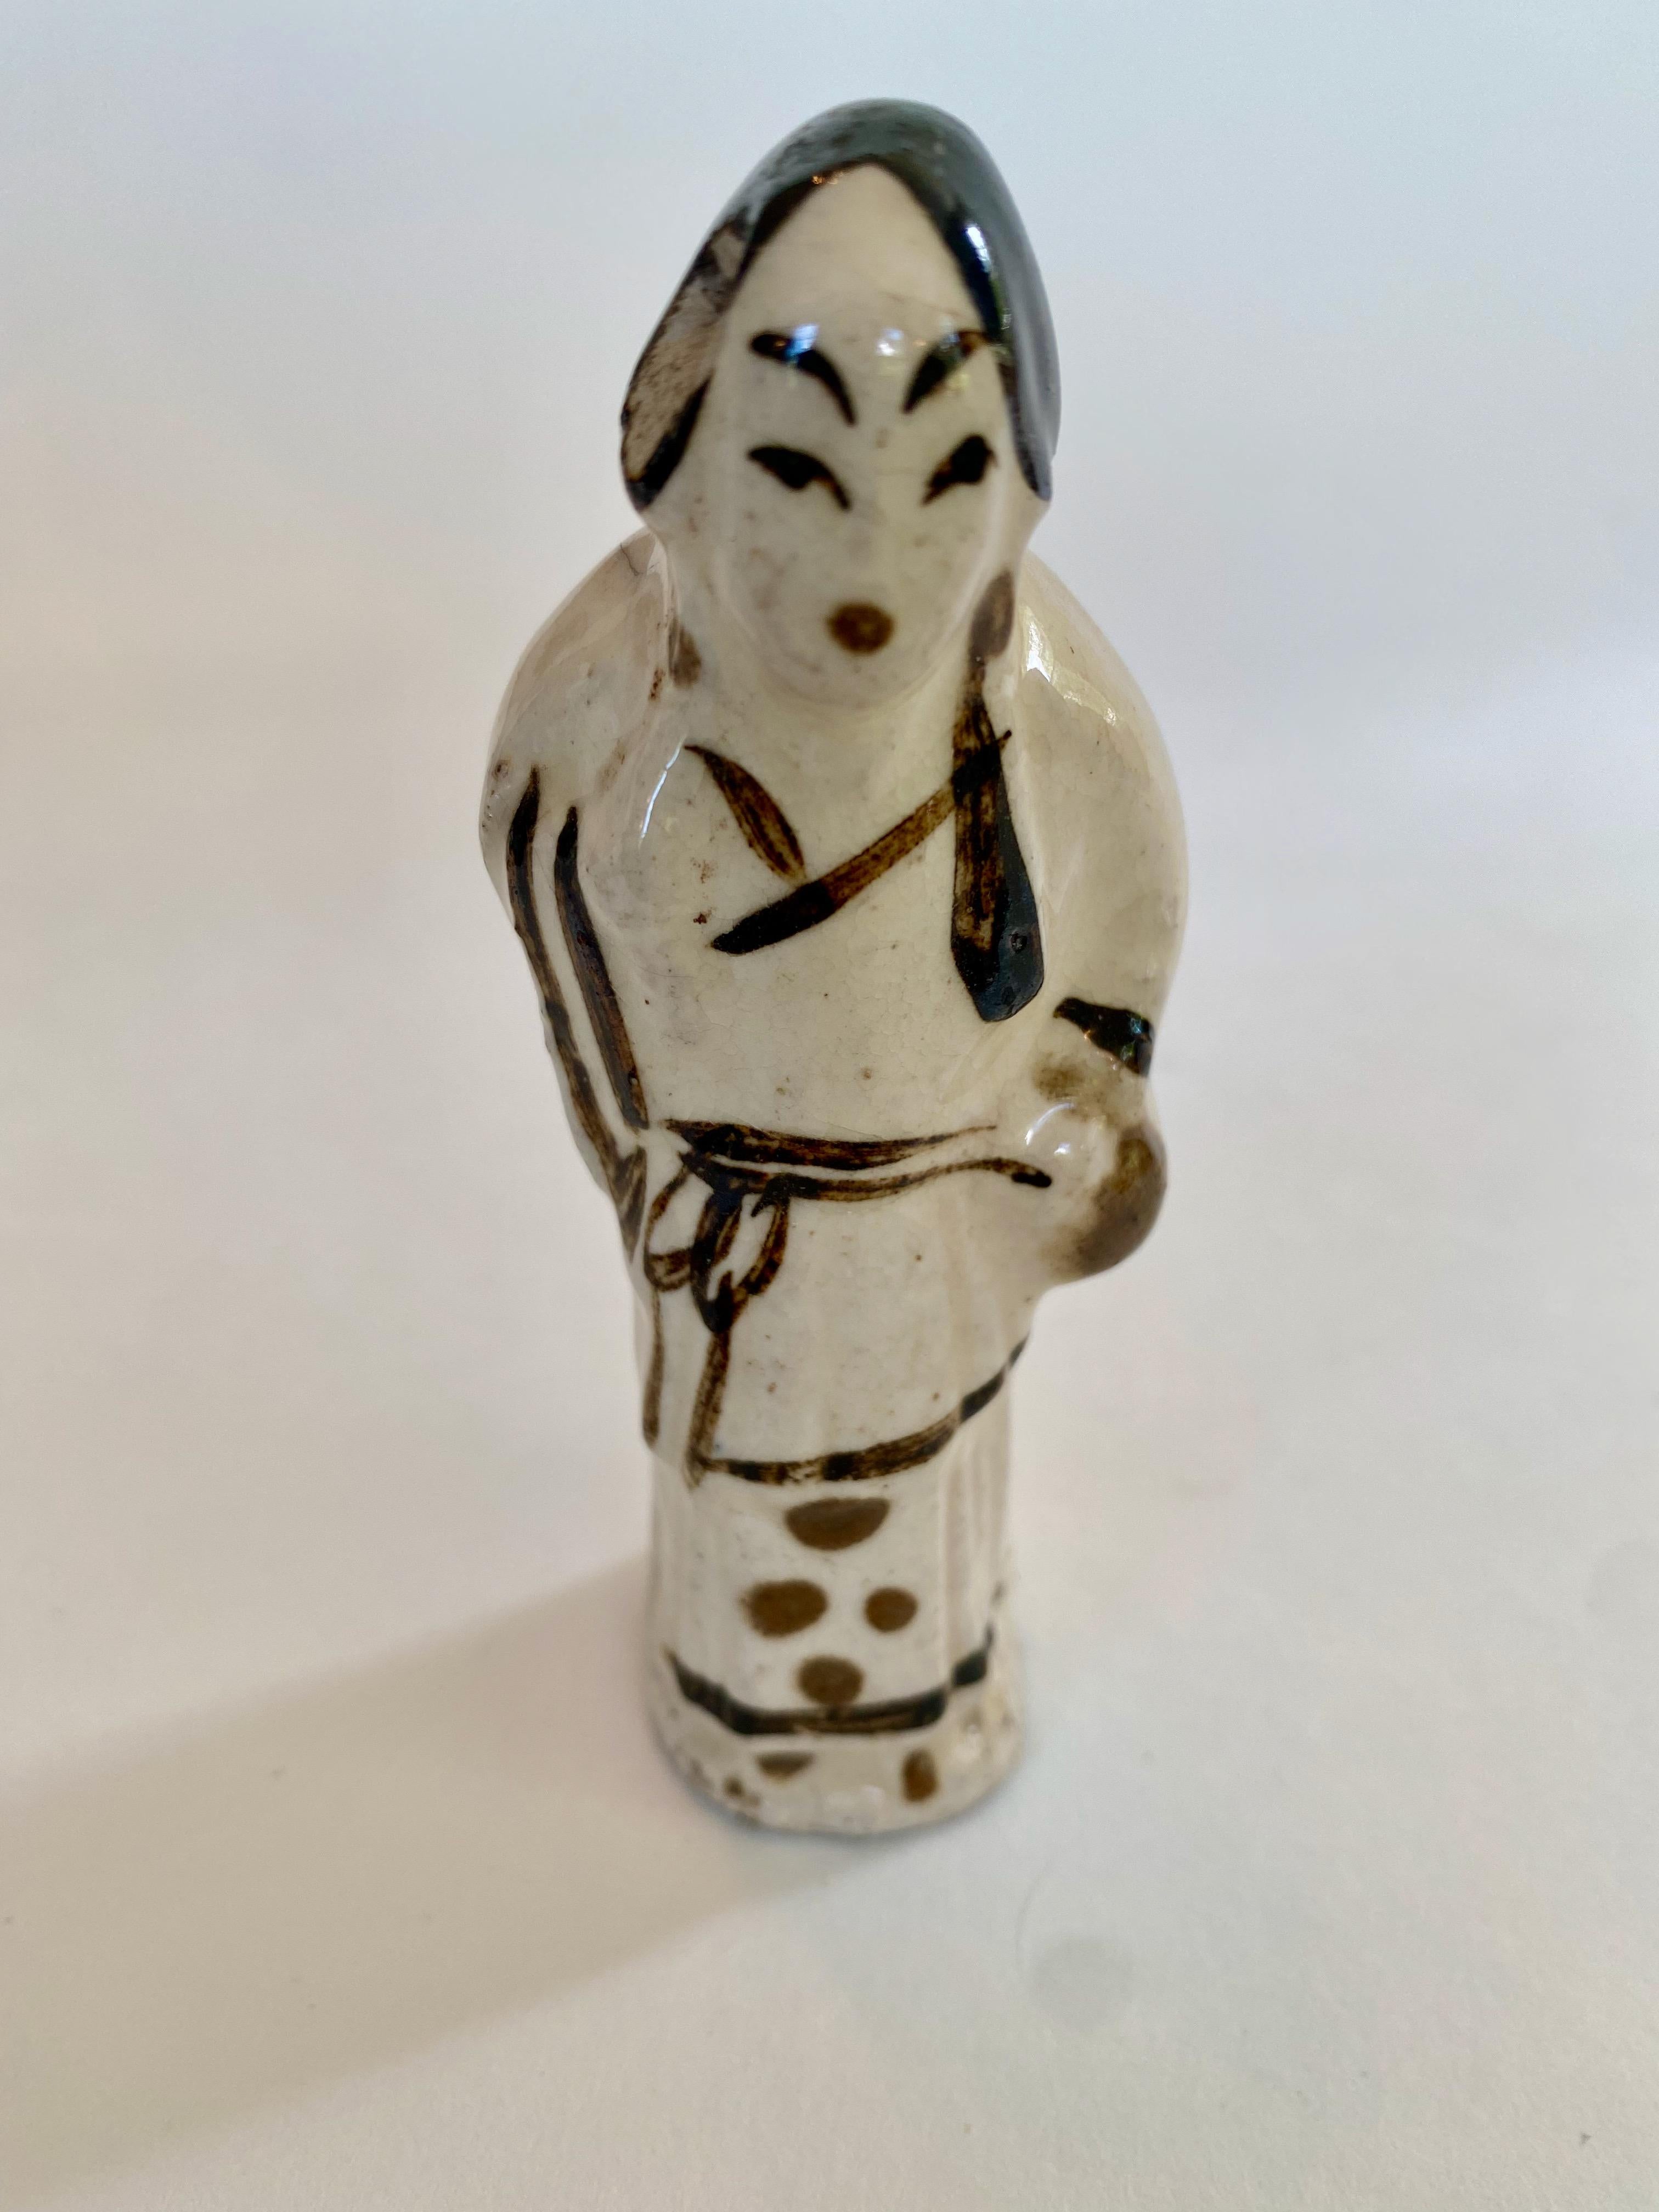 Ming dynasty pottery figure of a standing woman, likely from the Suzhou region.
This is a small figure with a lot of personality, rendered in cream and dark brown. WIth her slightly hunched stance and her hands in the folds of her kimono, a whole